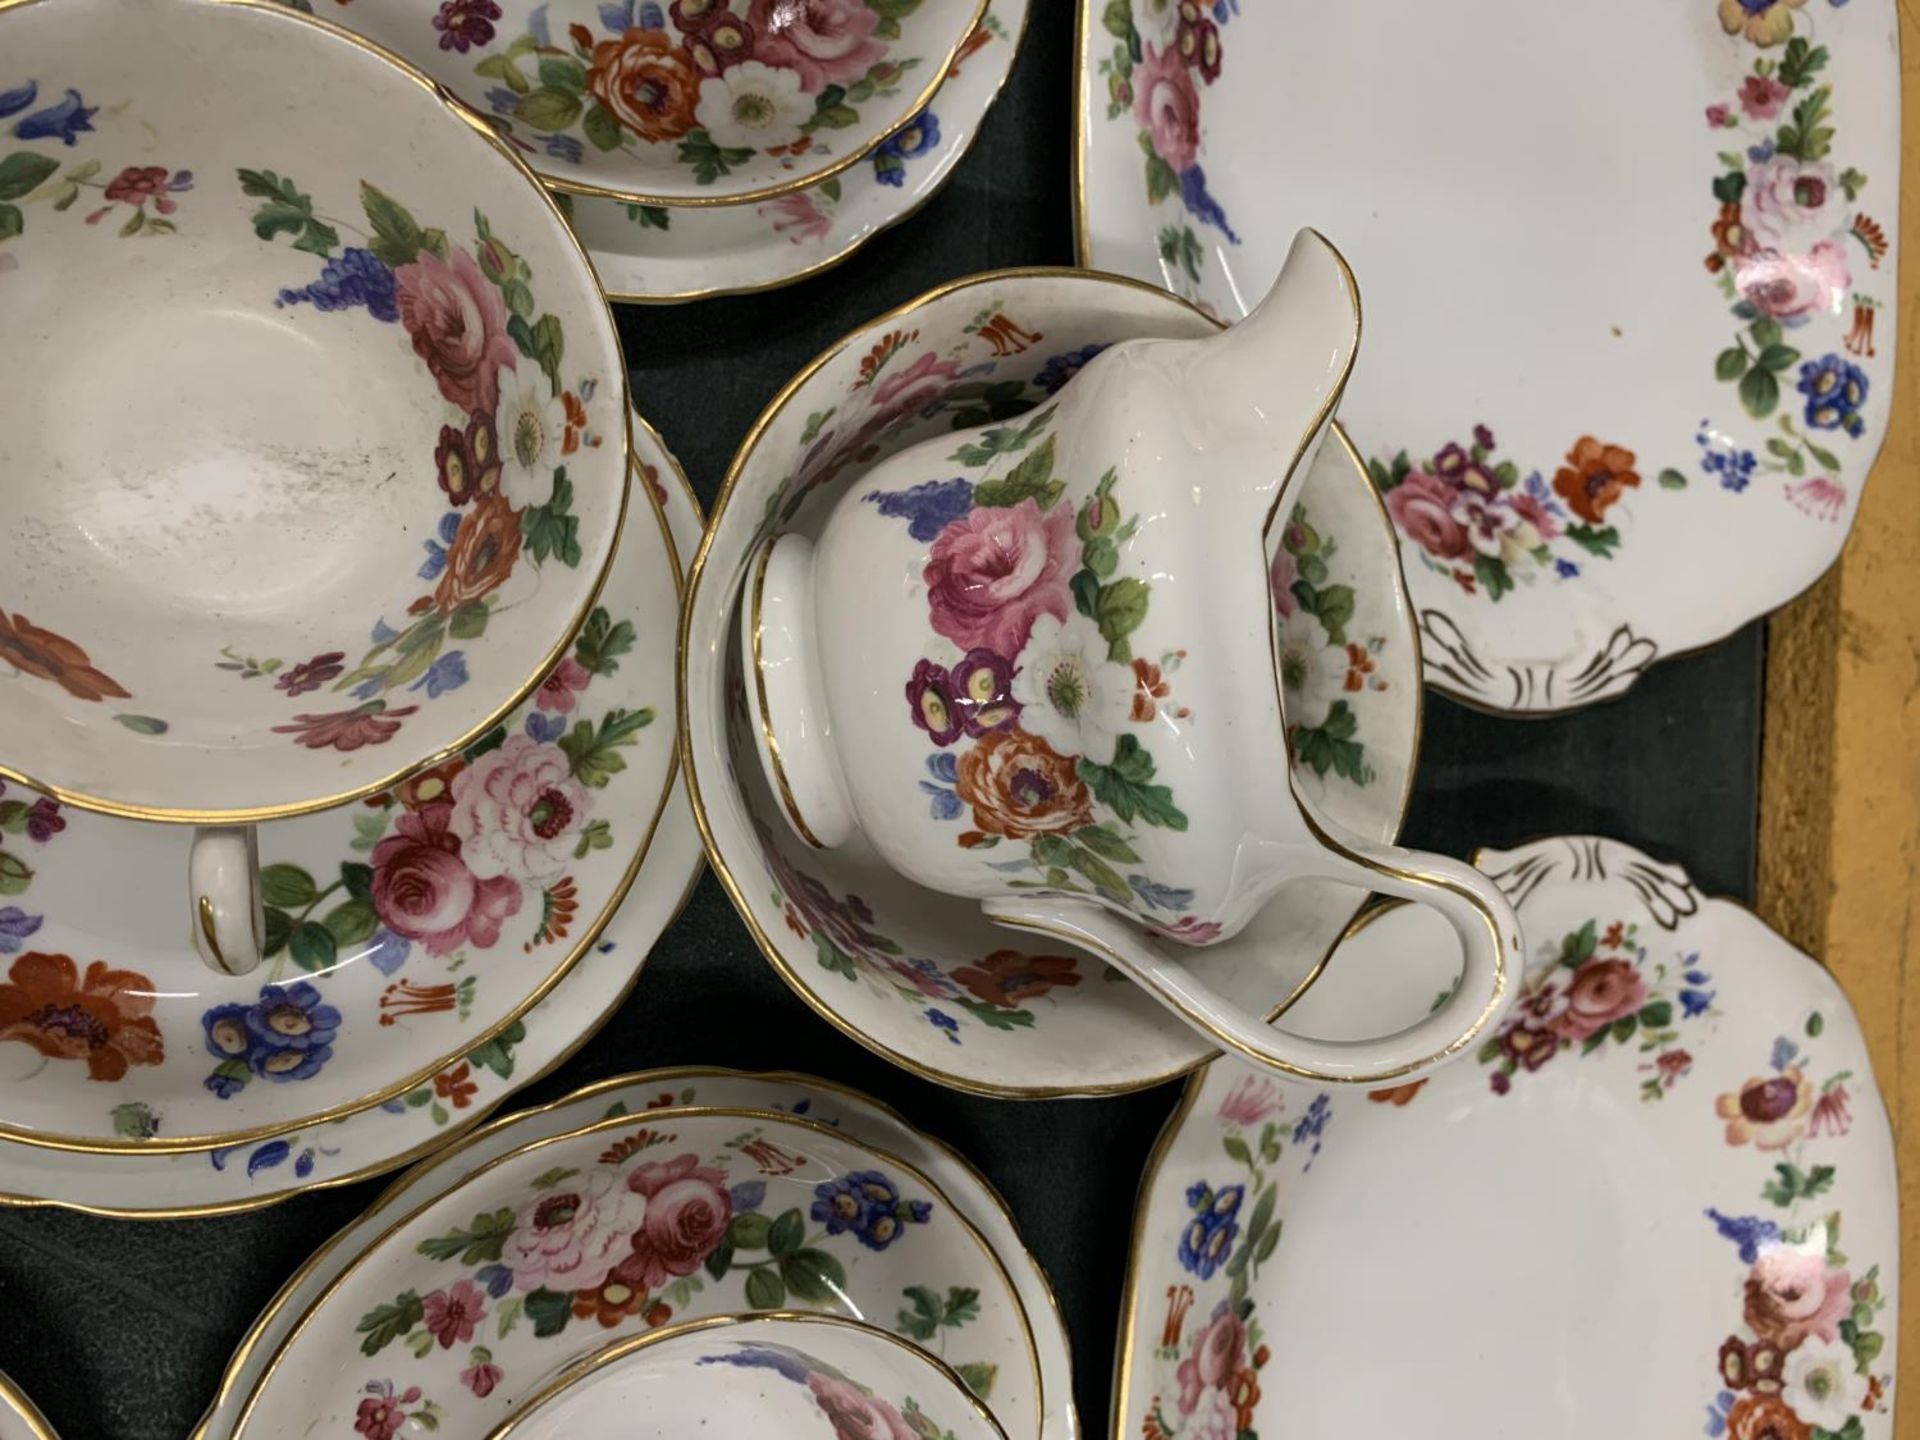 A VINTAGE FLORAL PATTERNED PART TEASET TO INCLUDE CAKE PLATES, CREAM JUG, SUGAR BOWL, CUPS, - Image 3 of 4